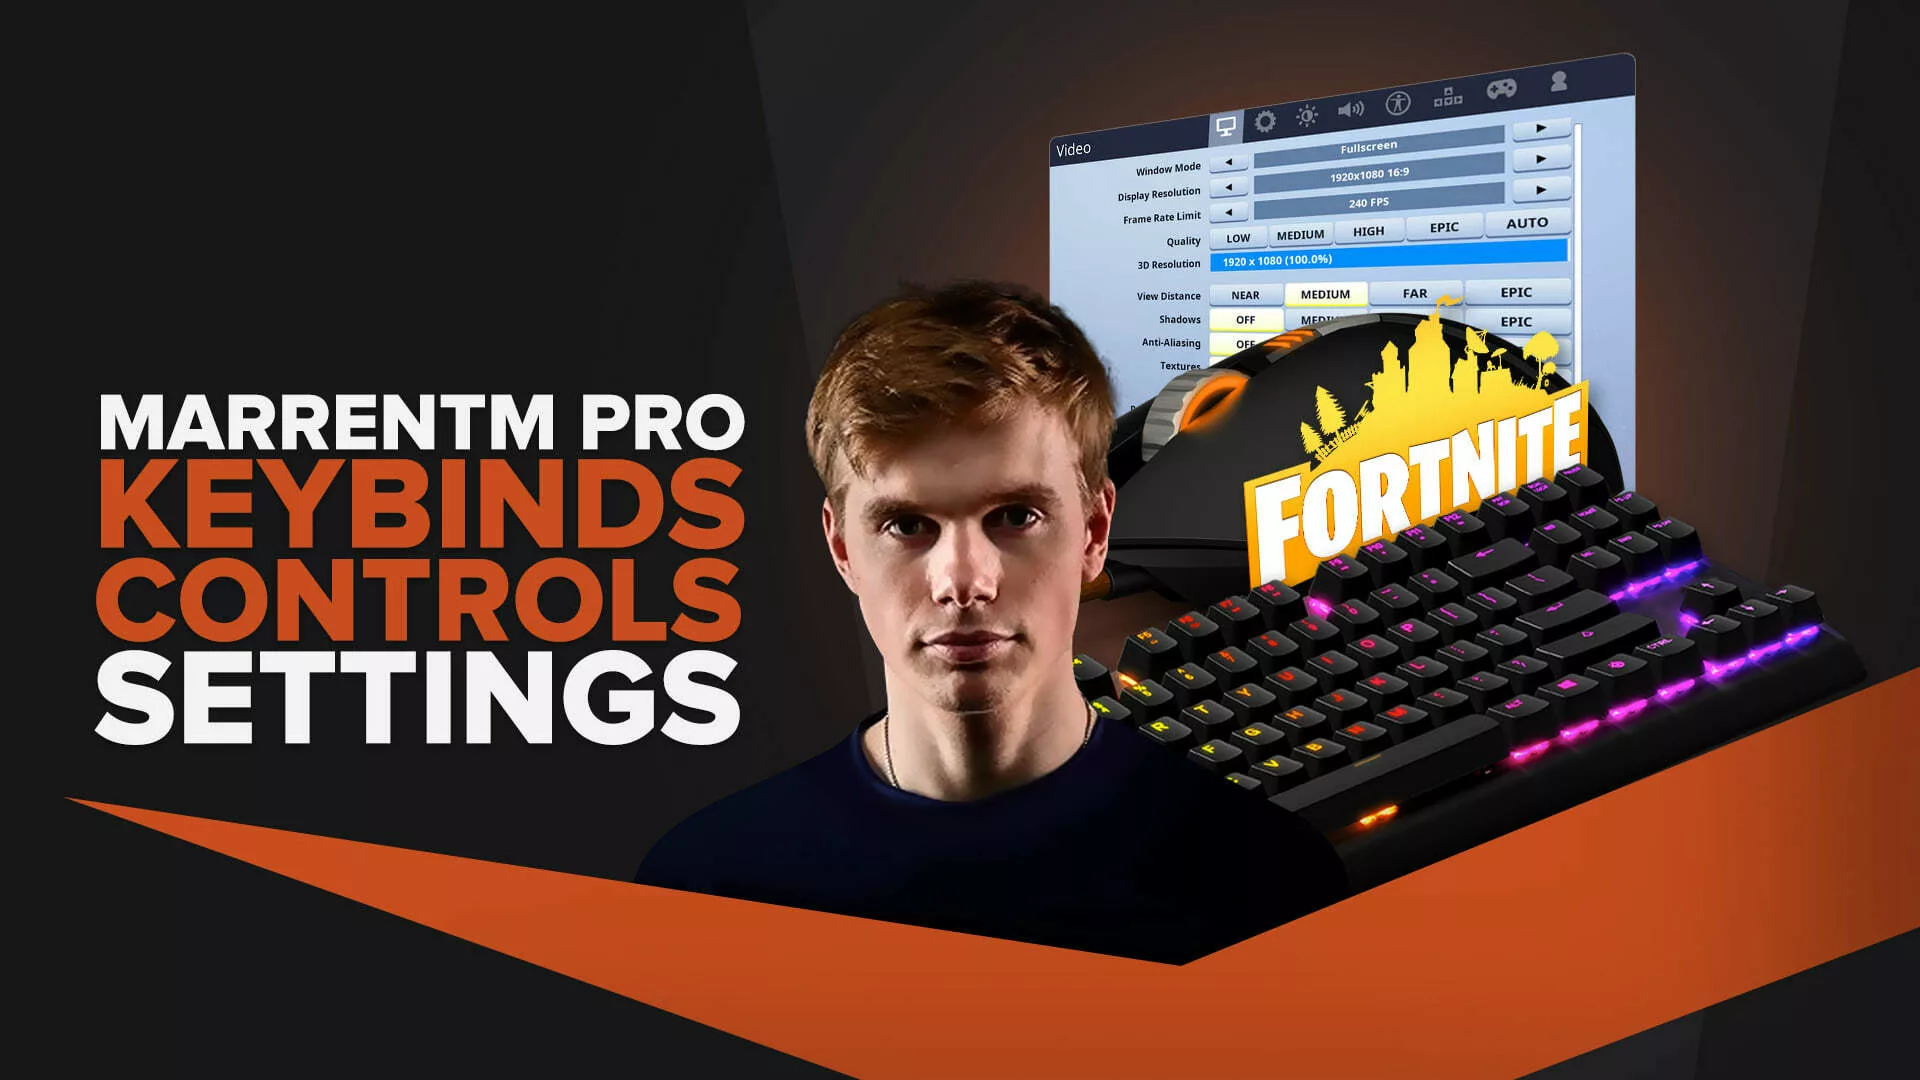 Marrentm's | Keybinds, Mouse, Video Pro Fornite Settings